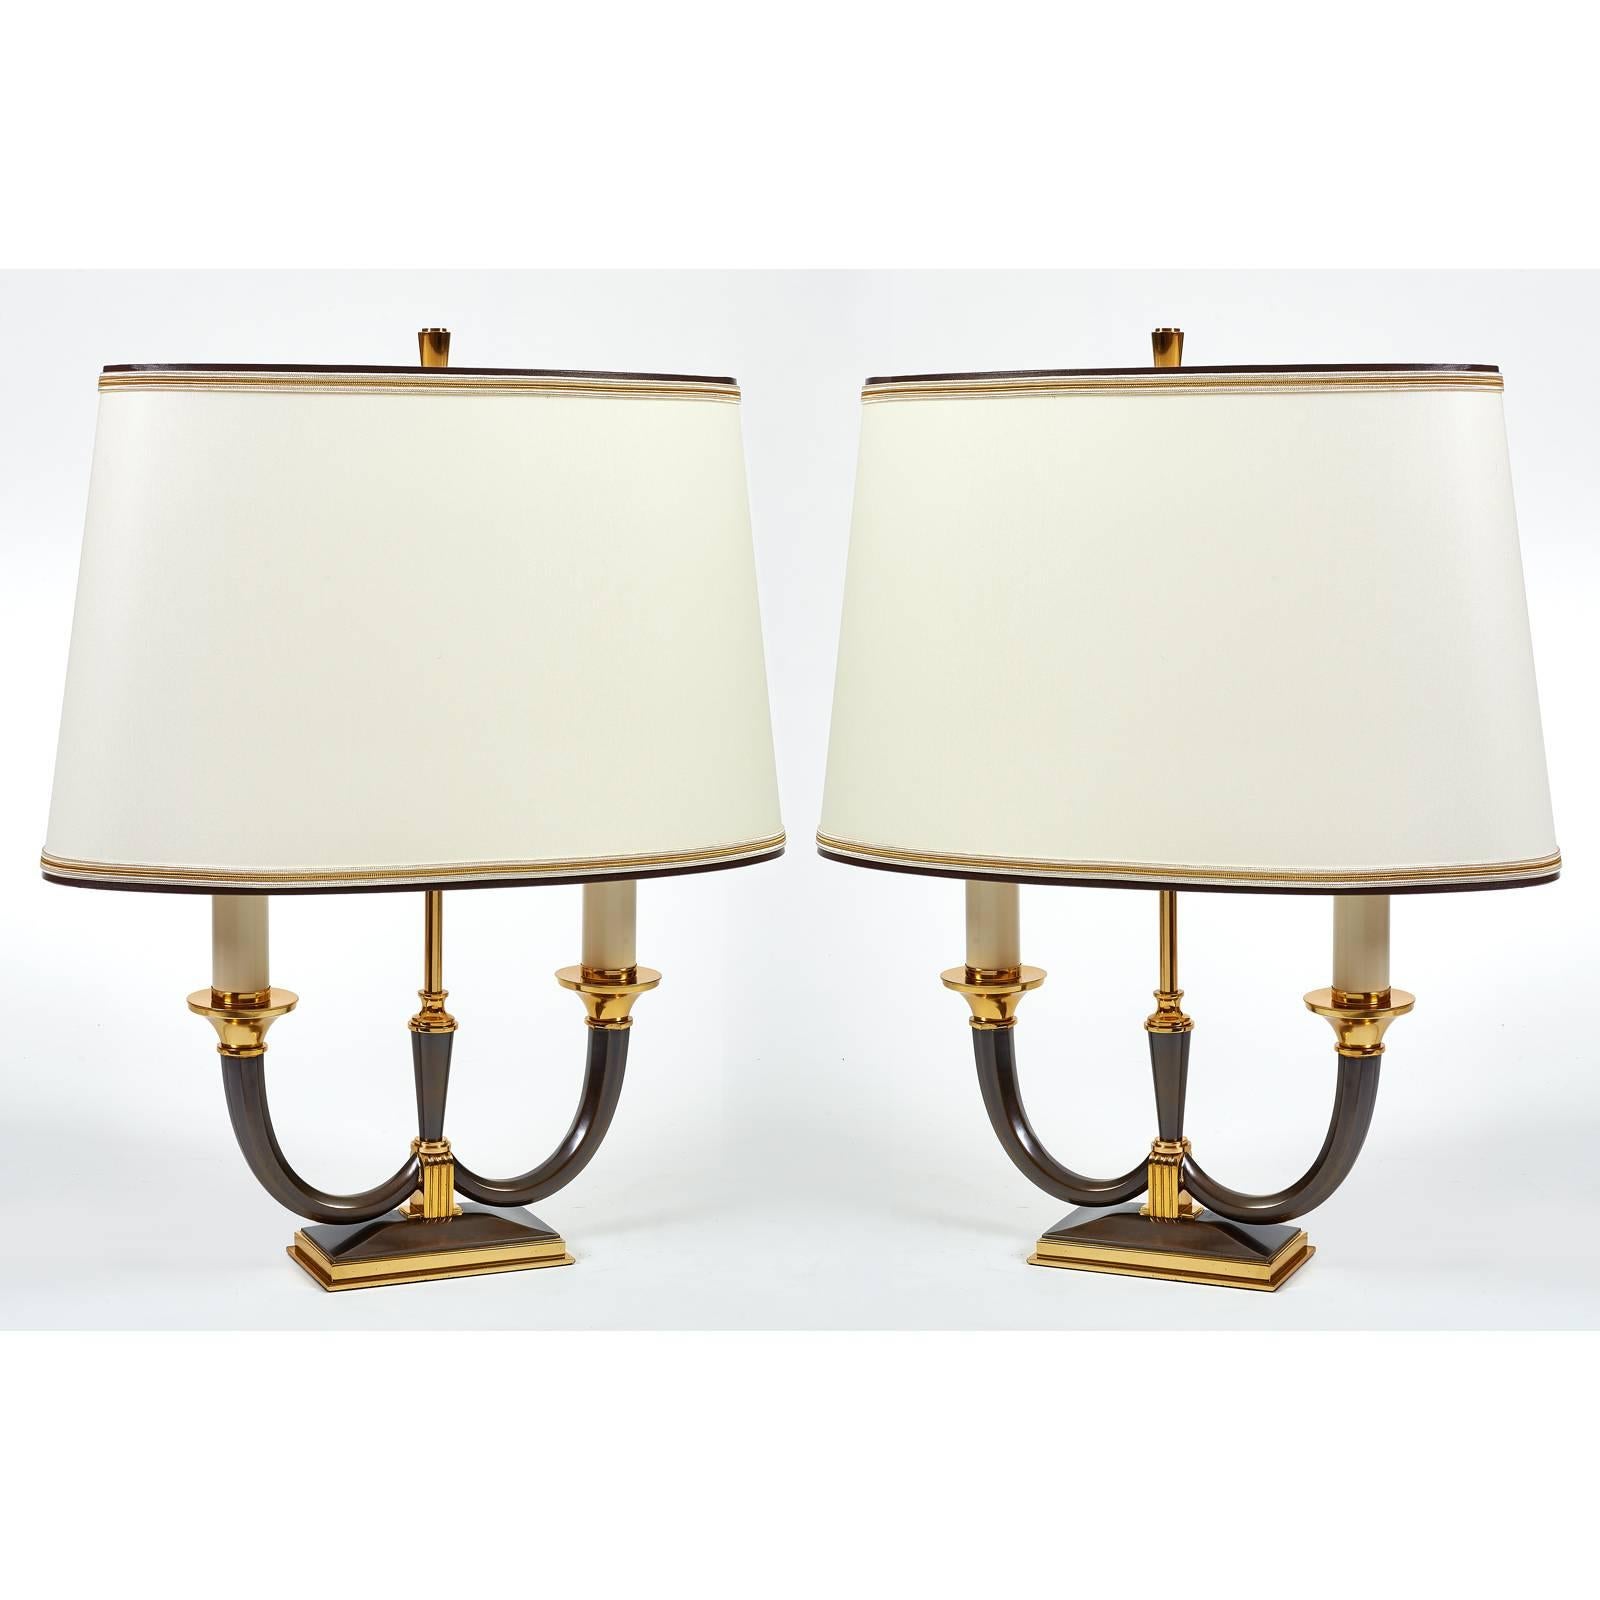 Mid-20th Century Elegant Pair of Faceted Bronze Lamps by Genet Michon